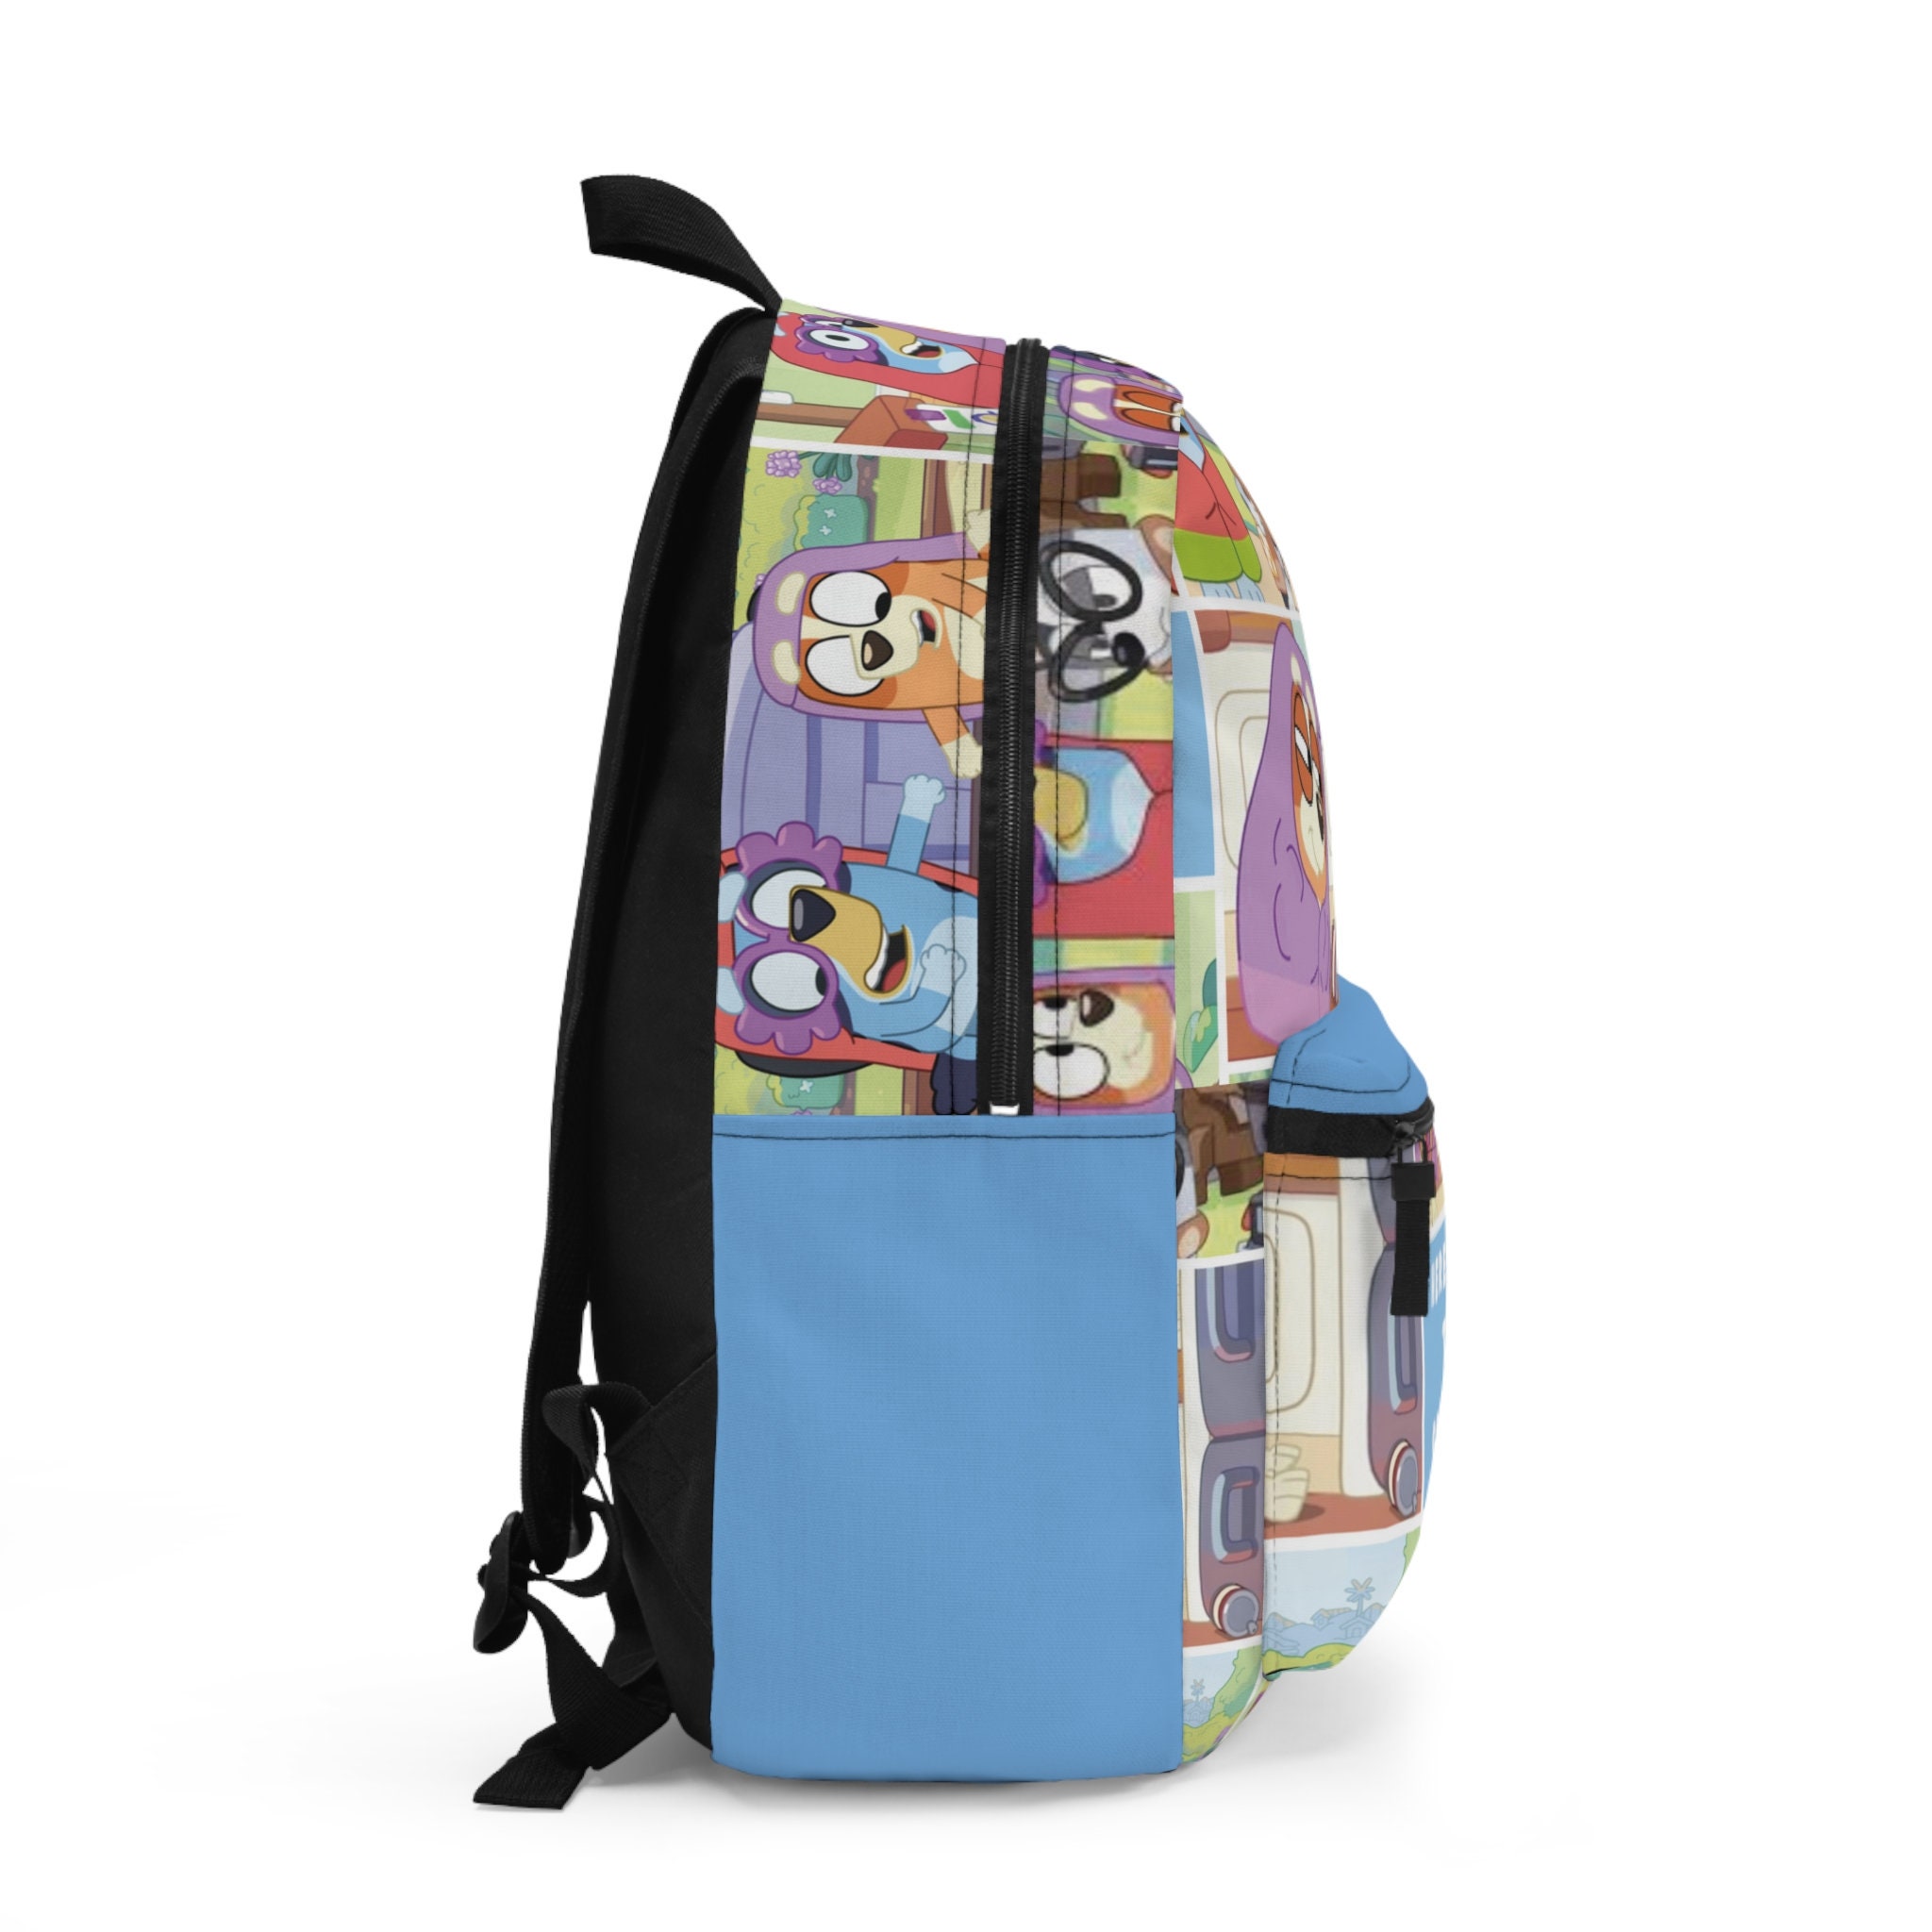 Discover Here Come The Grannies! BlueyDad Backpack